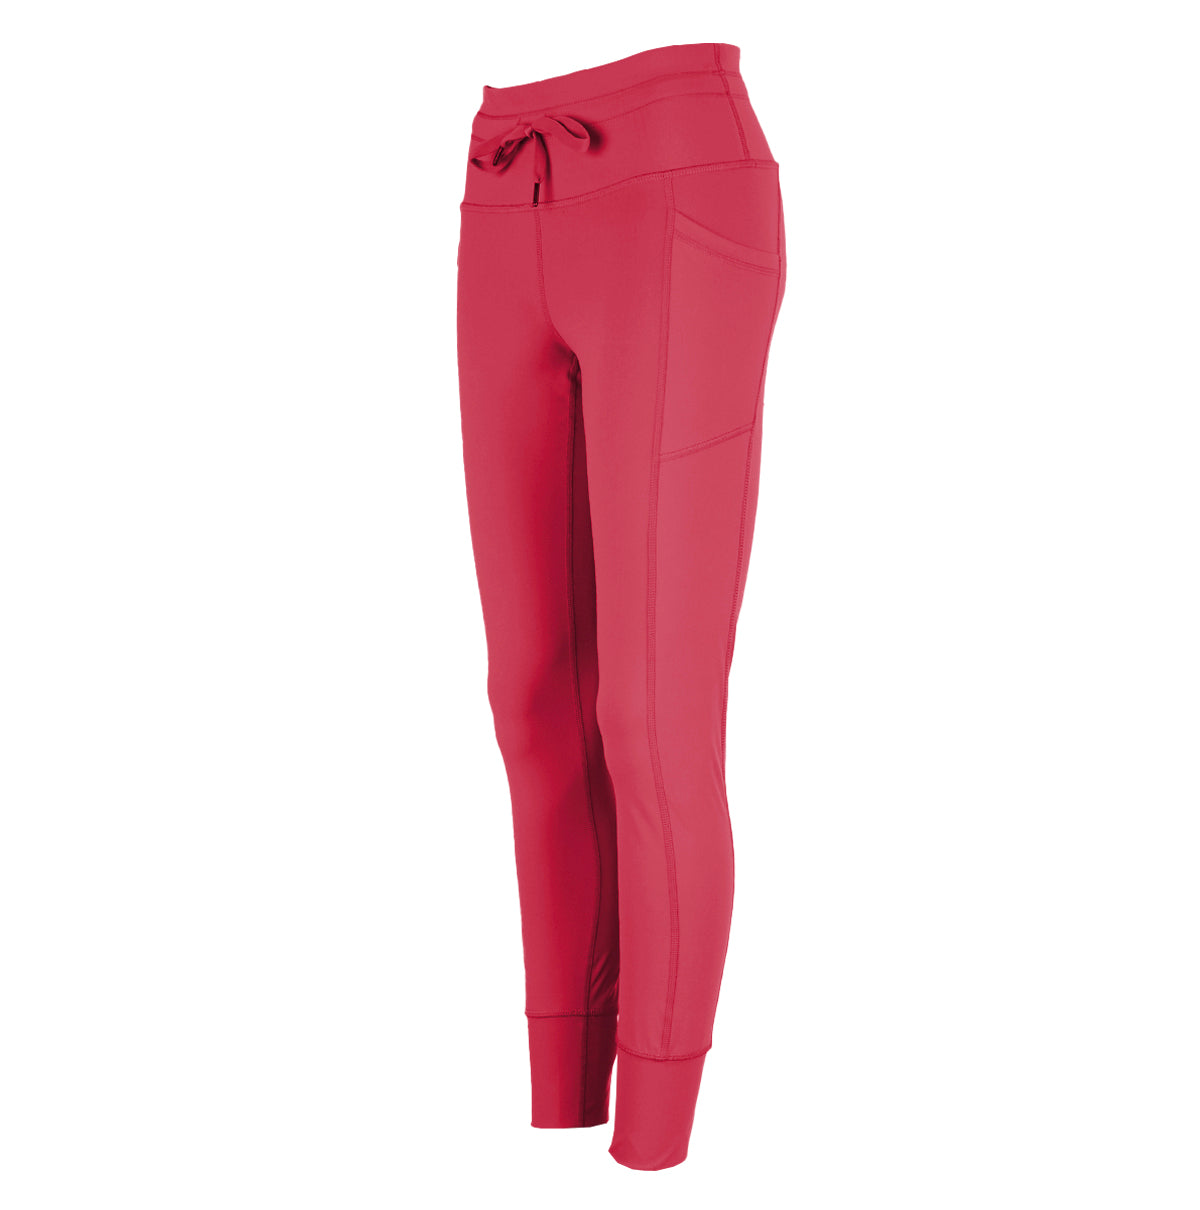 90 Degree By Reflex, Pants & Jumpsuits, Pink 78th Ankle Leggings With  Mush Cutouts On The Side Size Xs